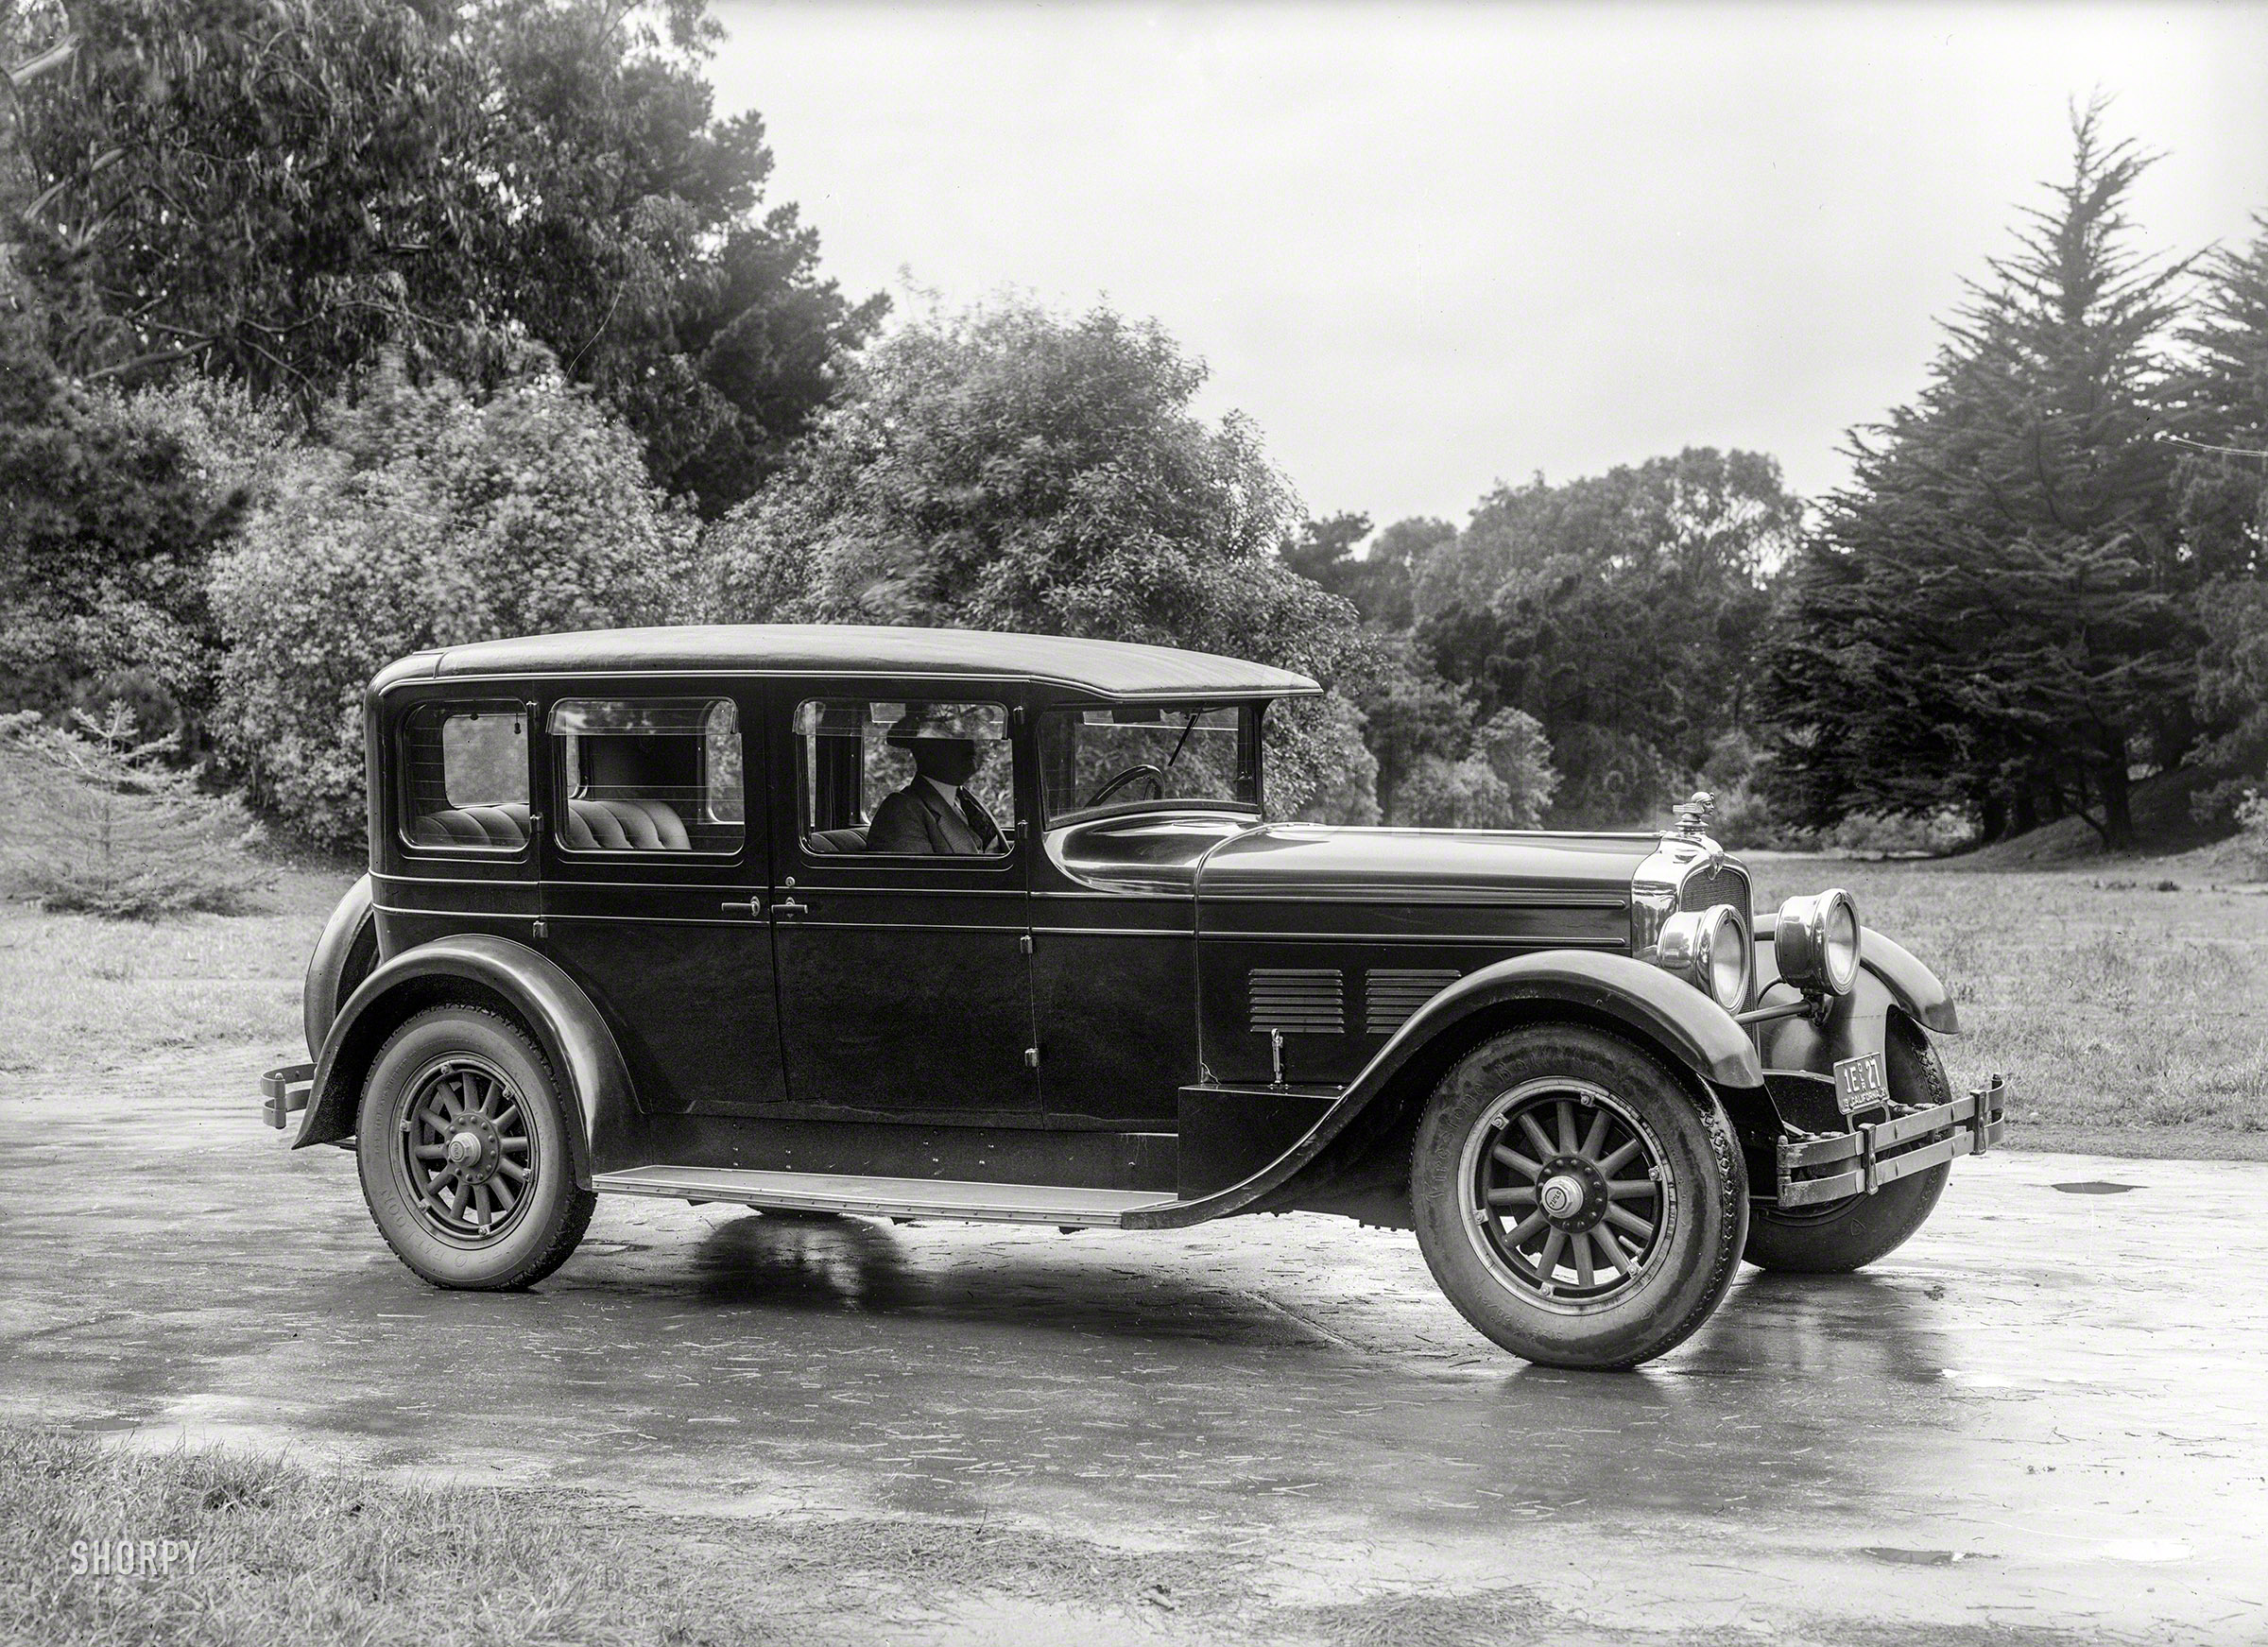 San Francisco, 1927. "Stutz Vertical Eight with Safety Chassis." Last glimpsed here. 5x7 glass negative by Christopher Helin. View full size.